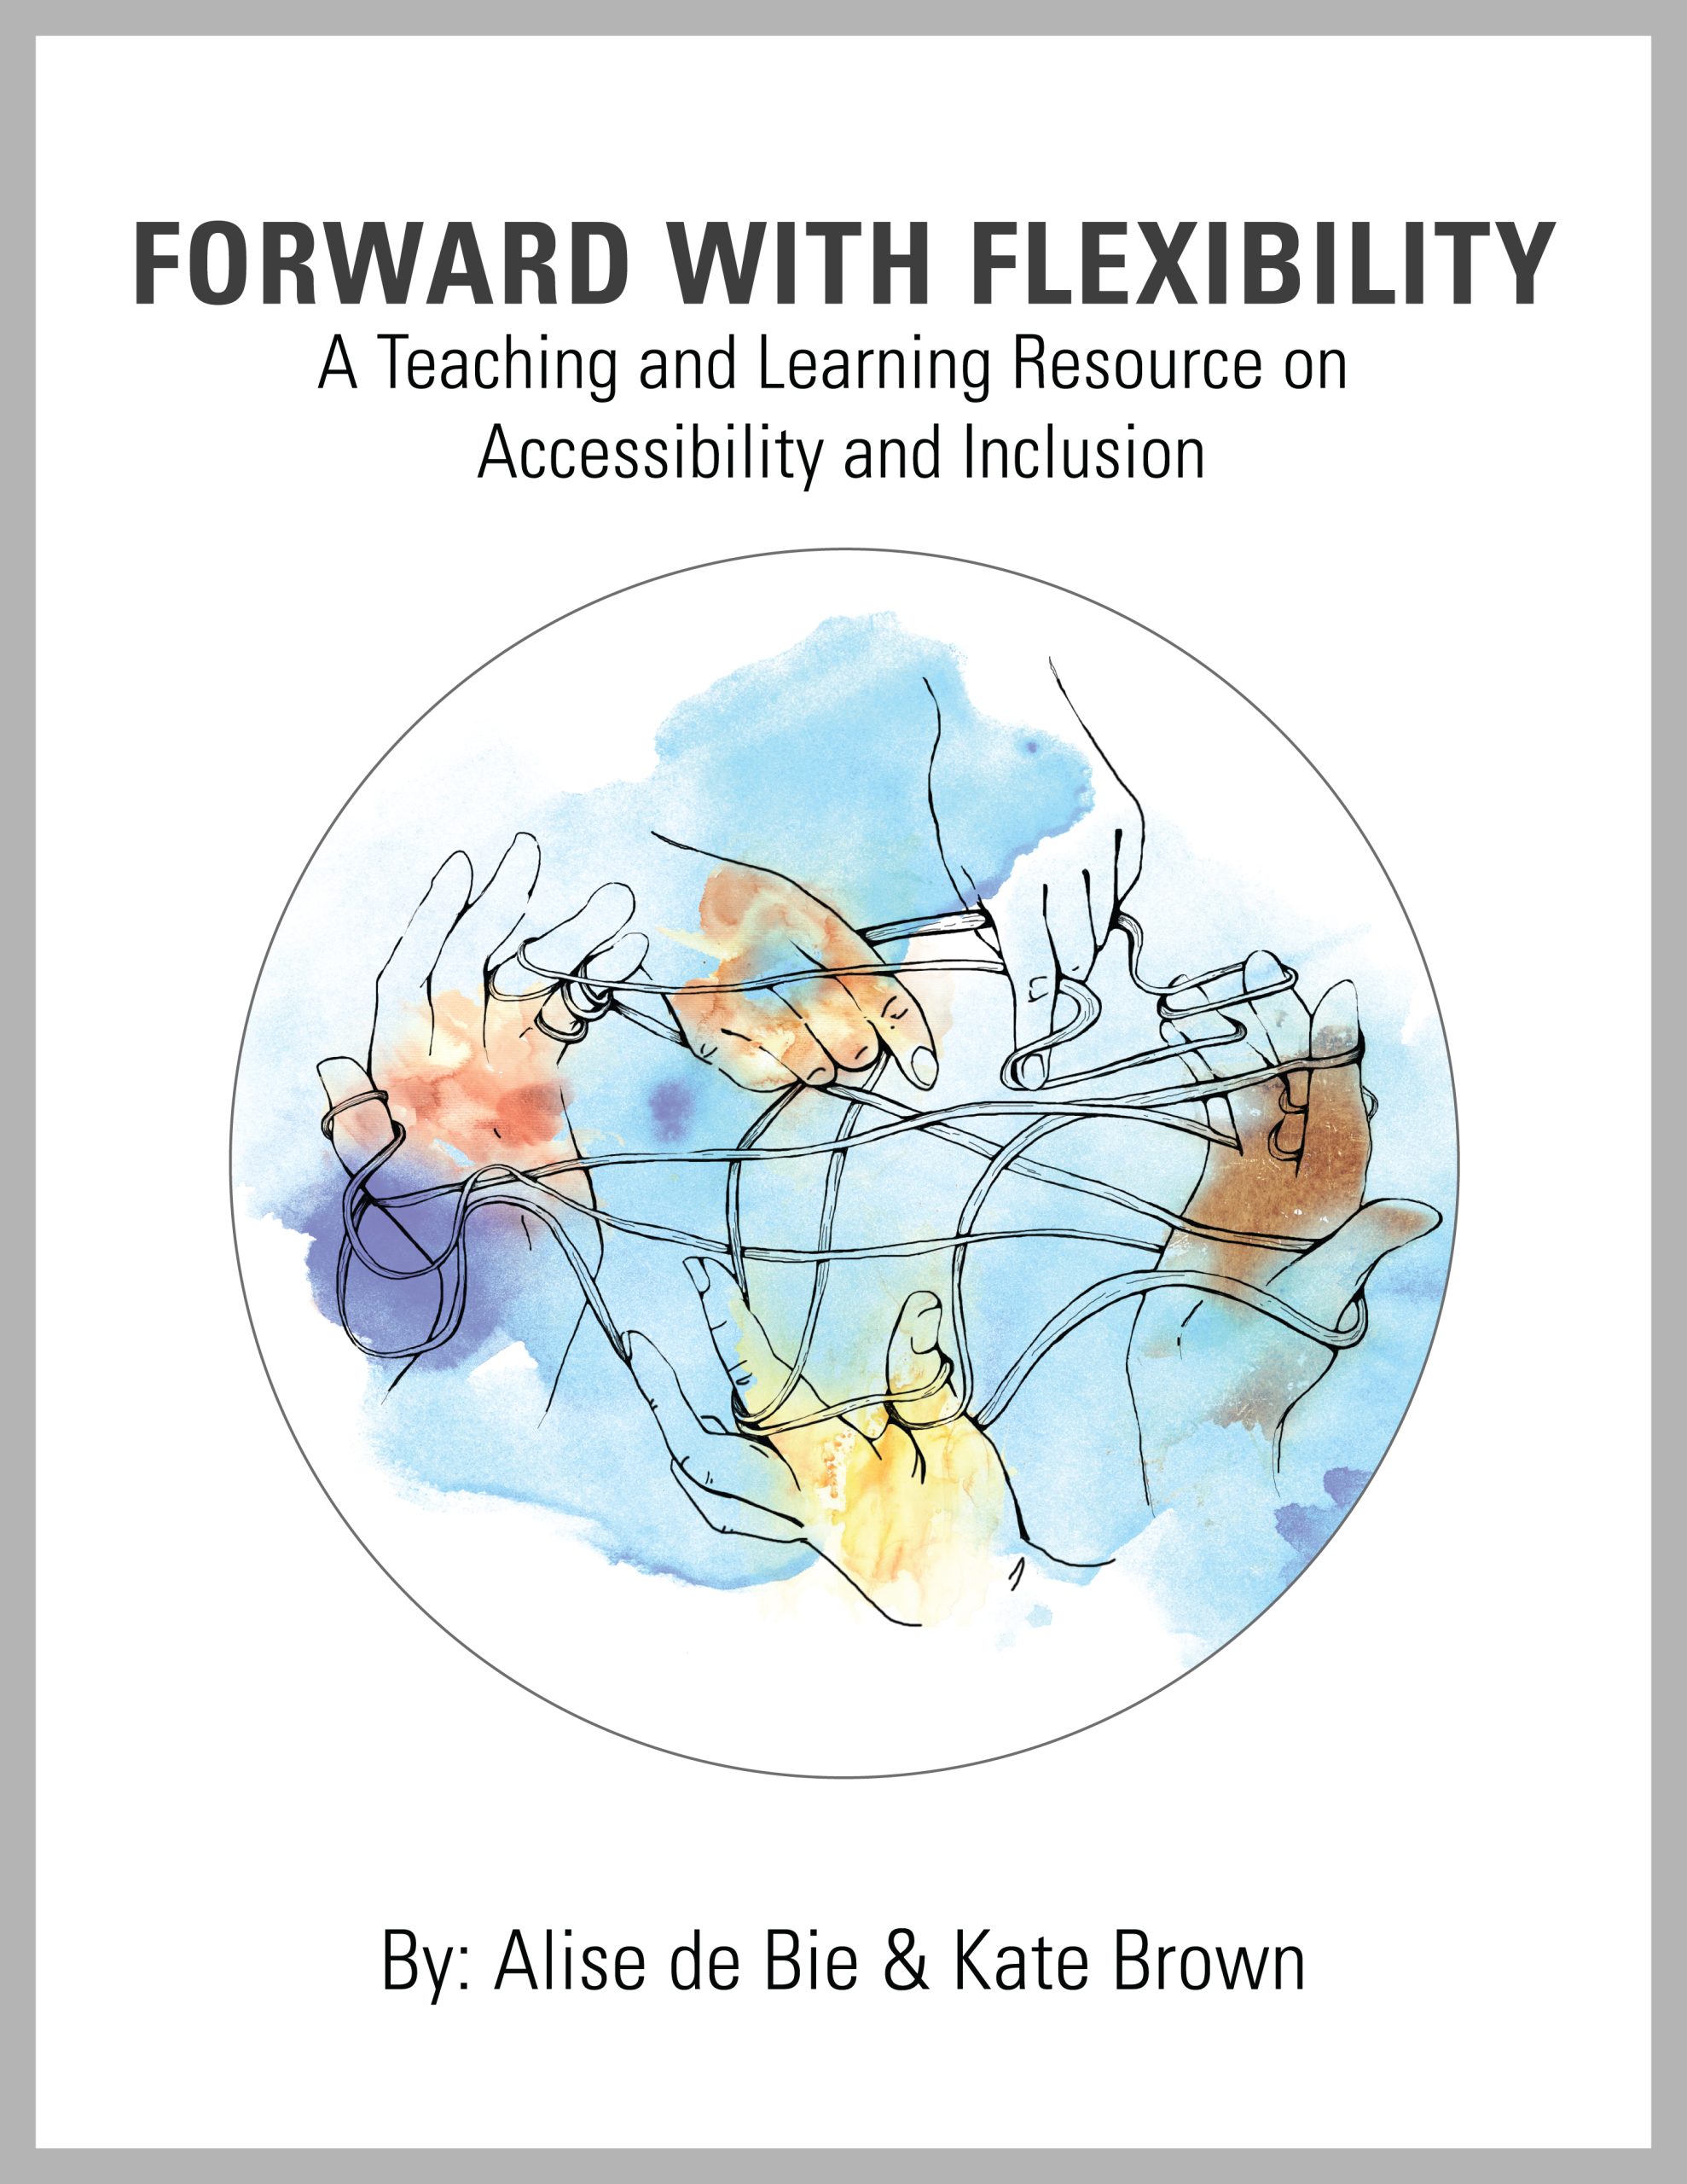 Forward With Flexibility: A Teaching and Learning Resource on Accessibility and Inclusion by Alise de Bie and Kate Brown